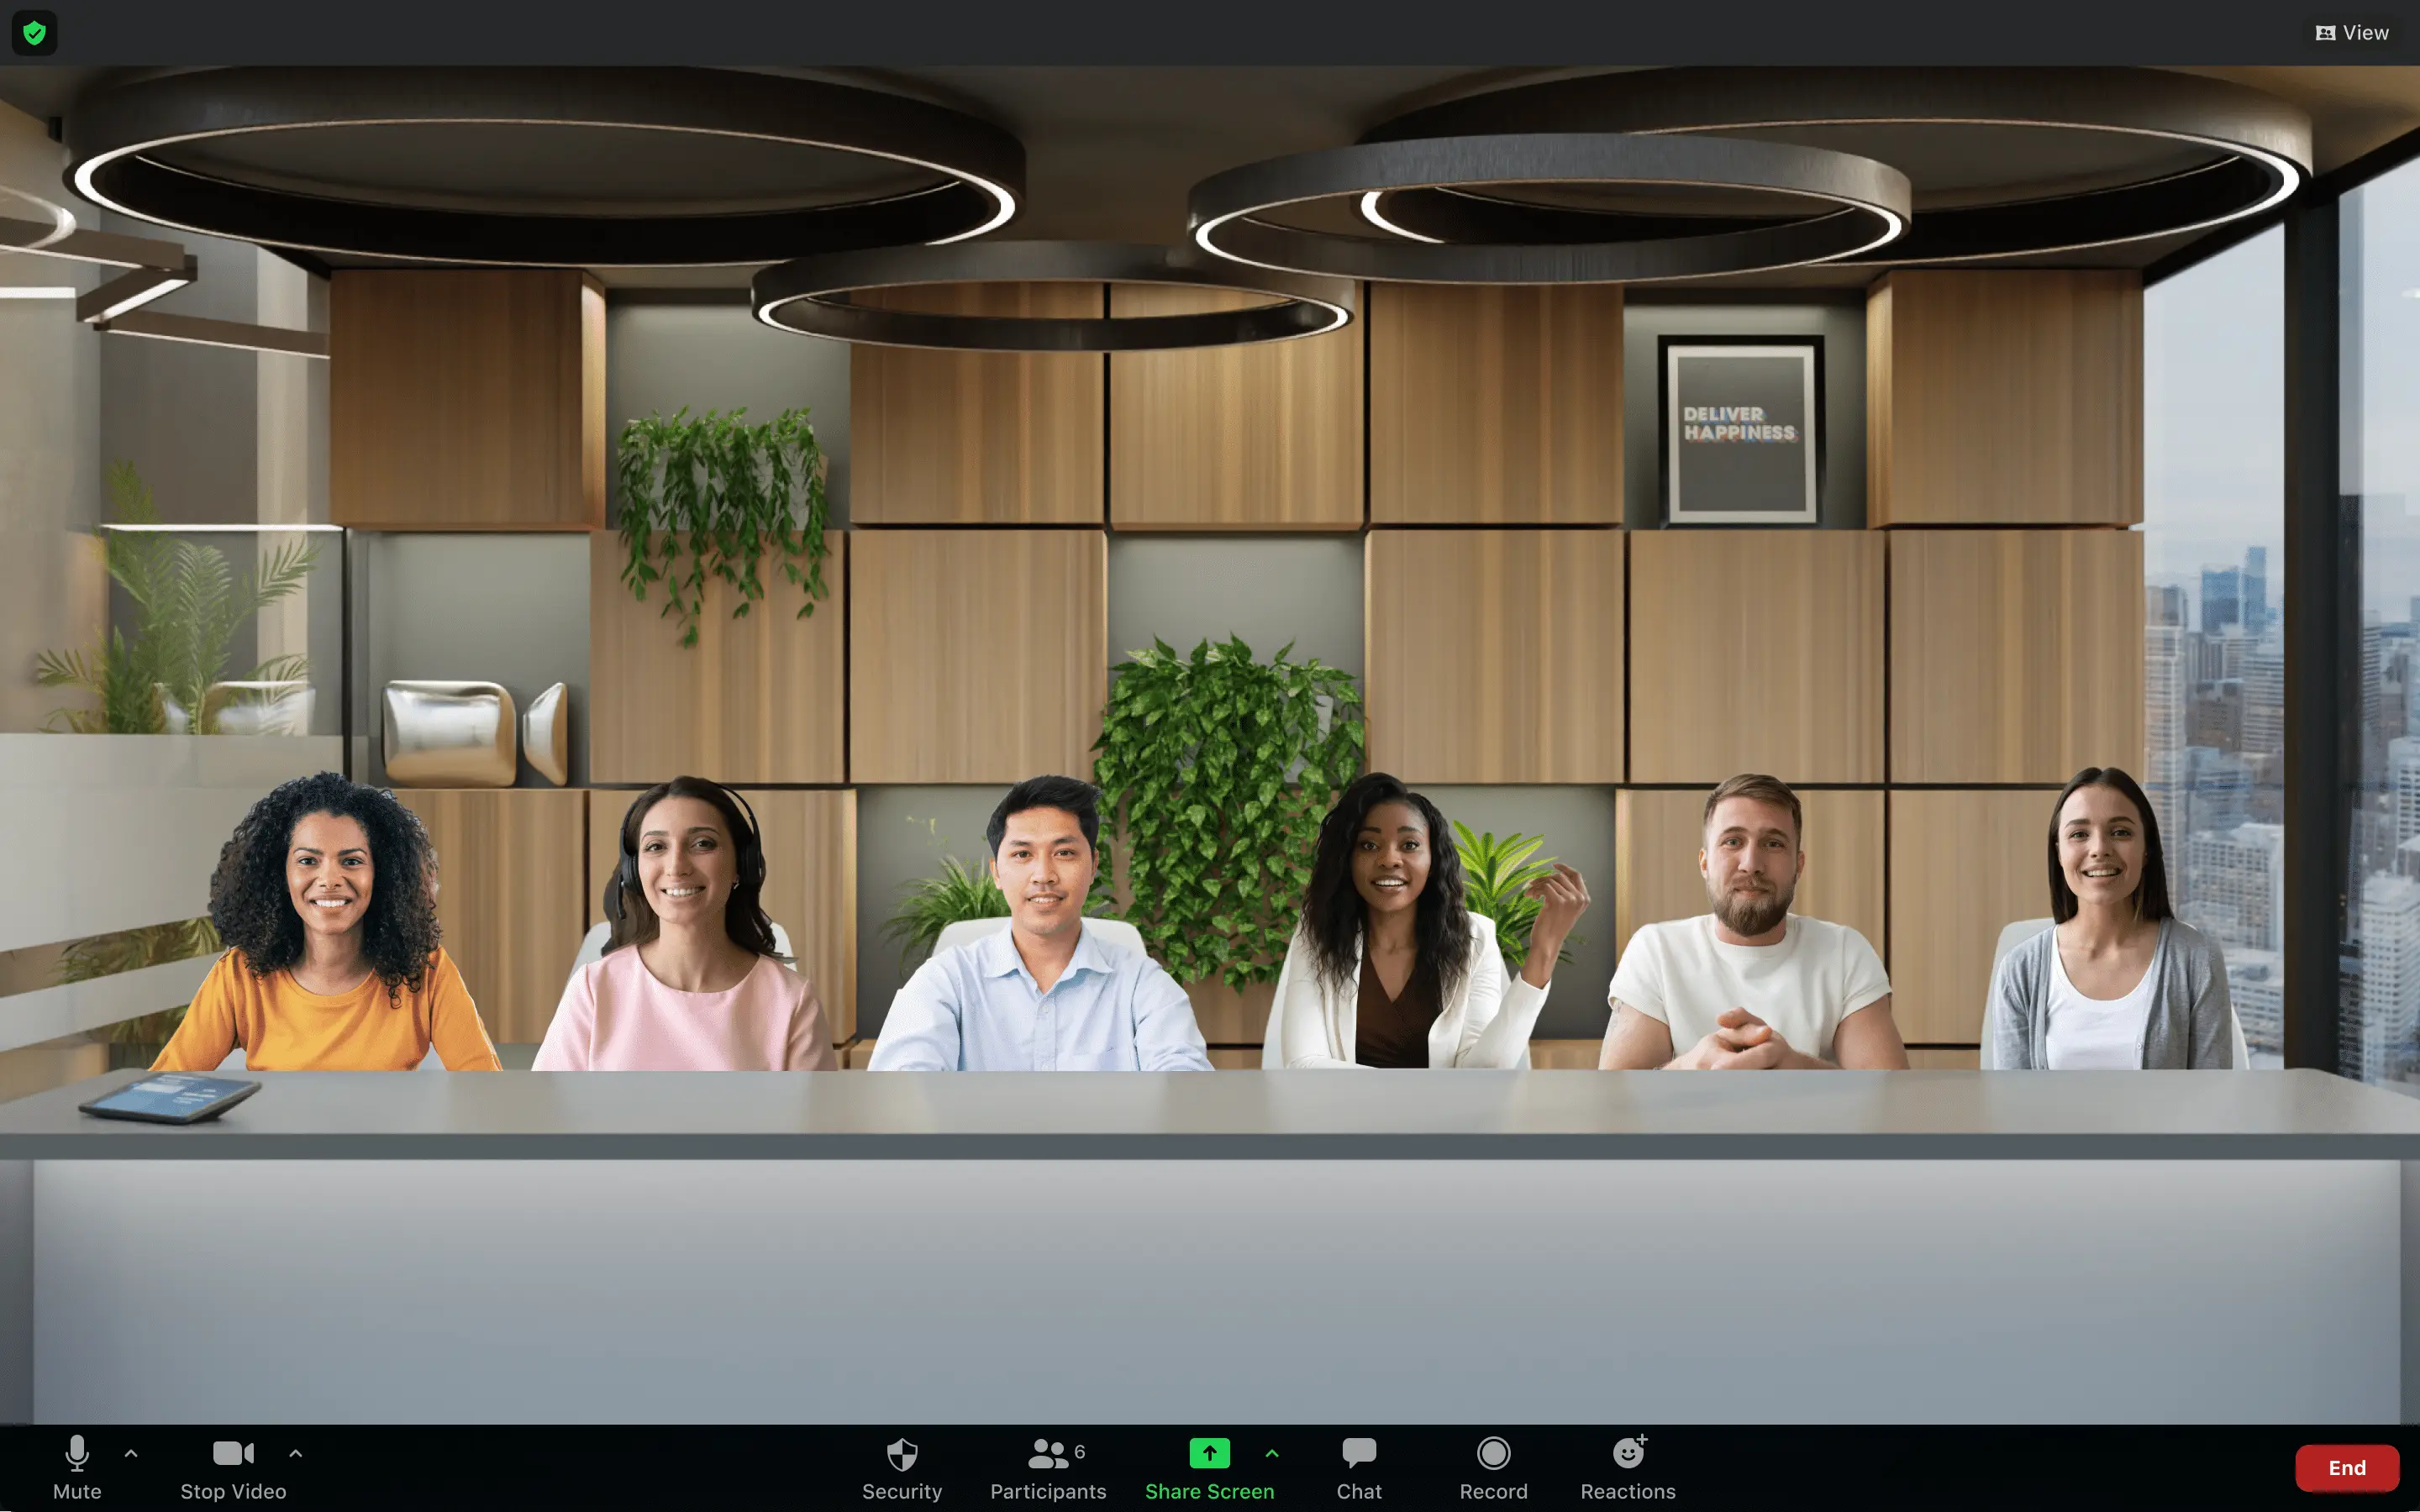 Zoom's Immersive View showing meeting participants in a single virtual scene